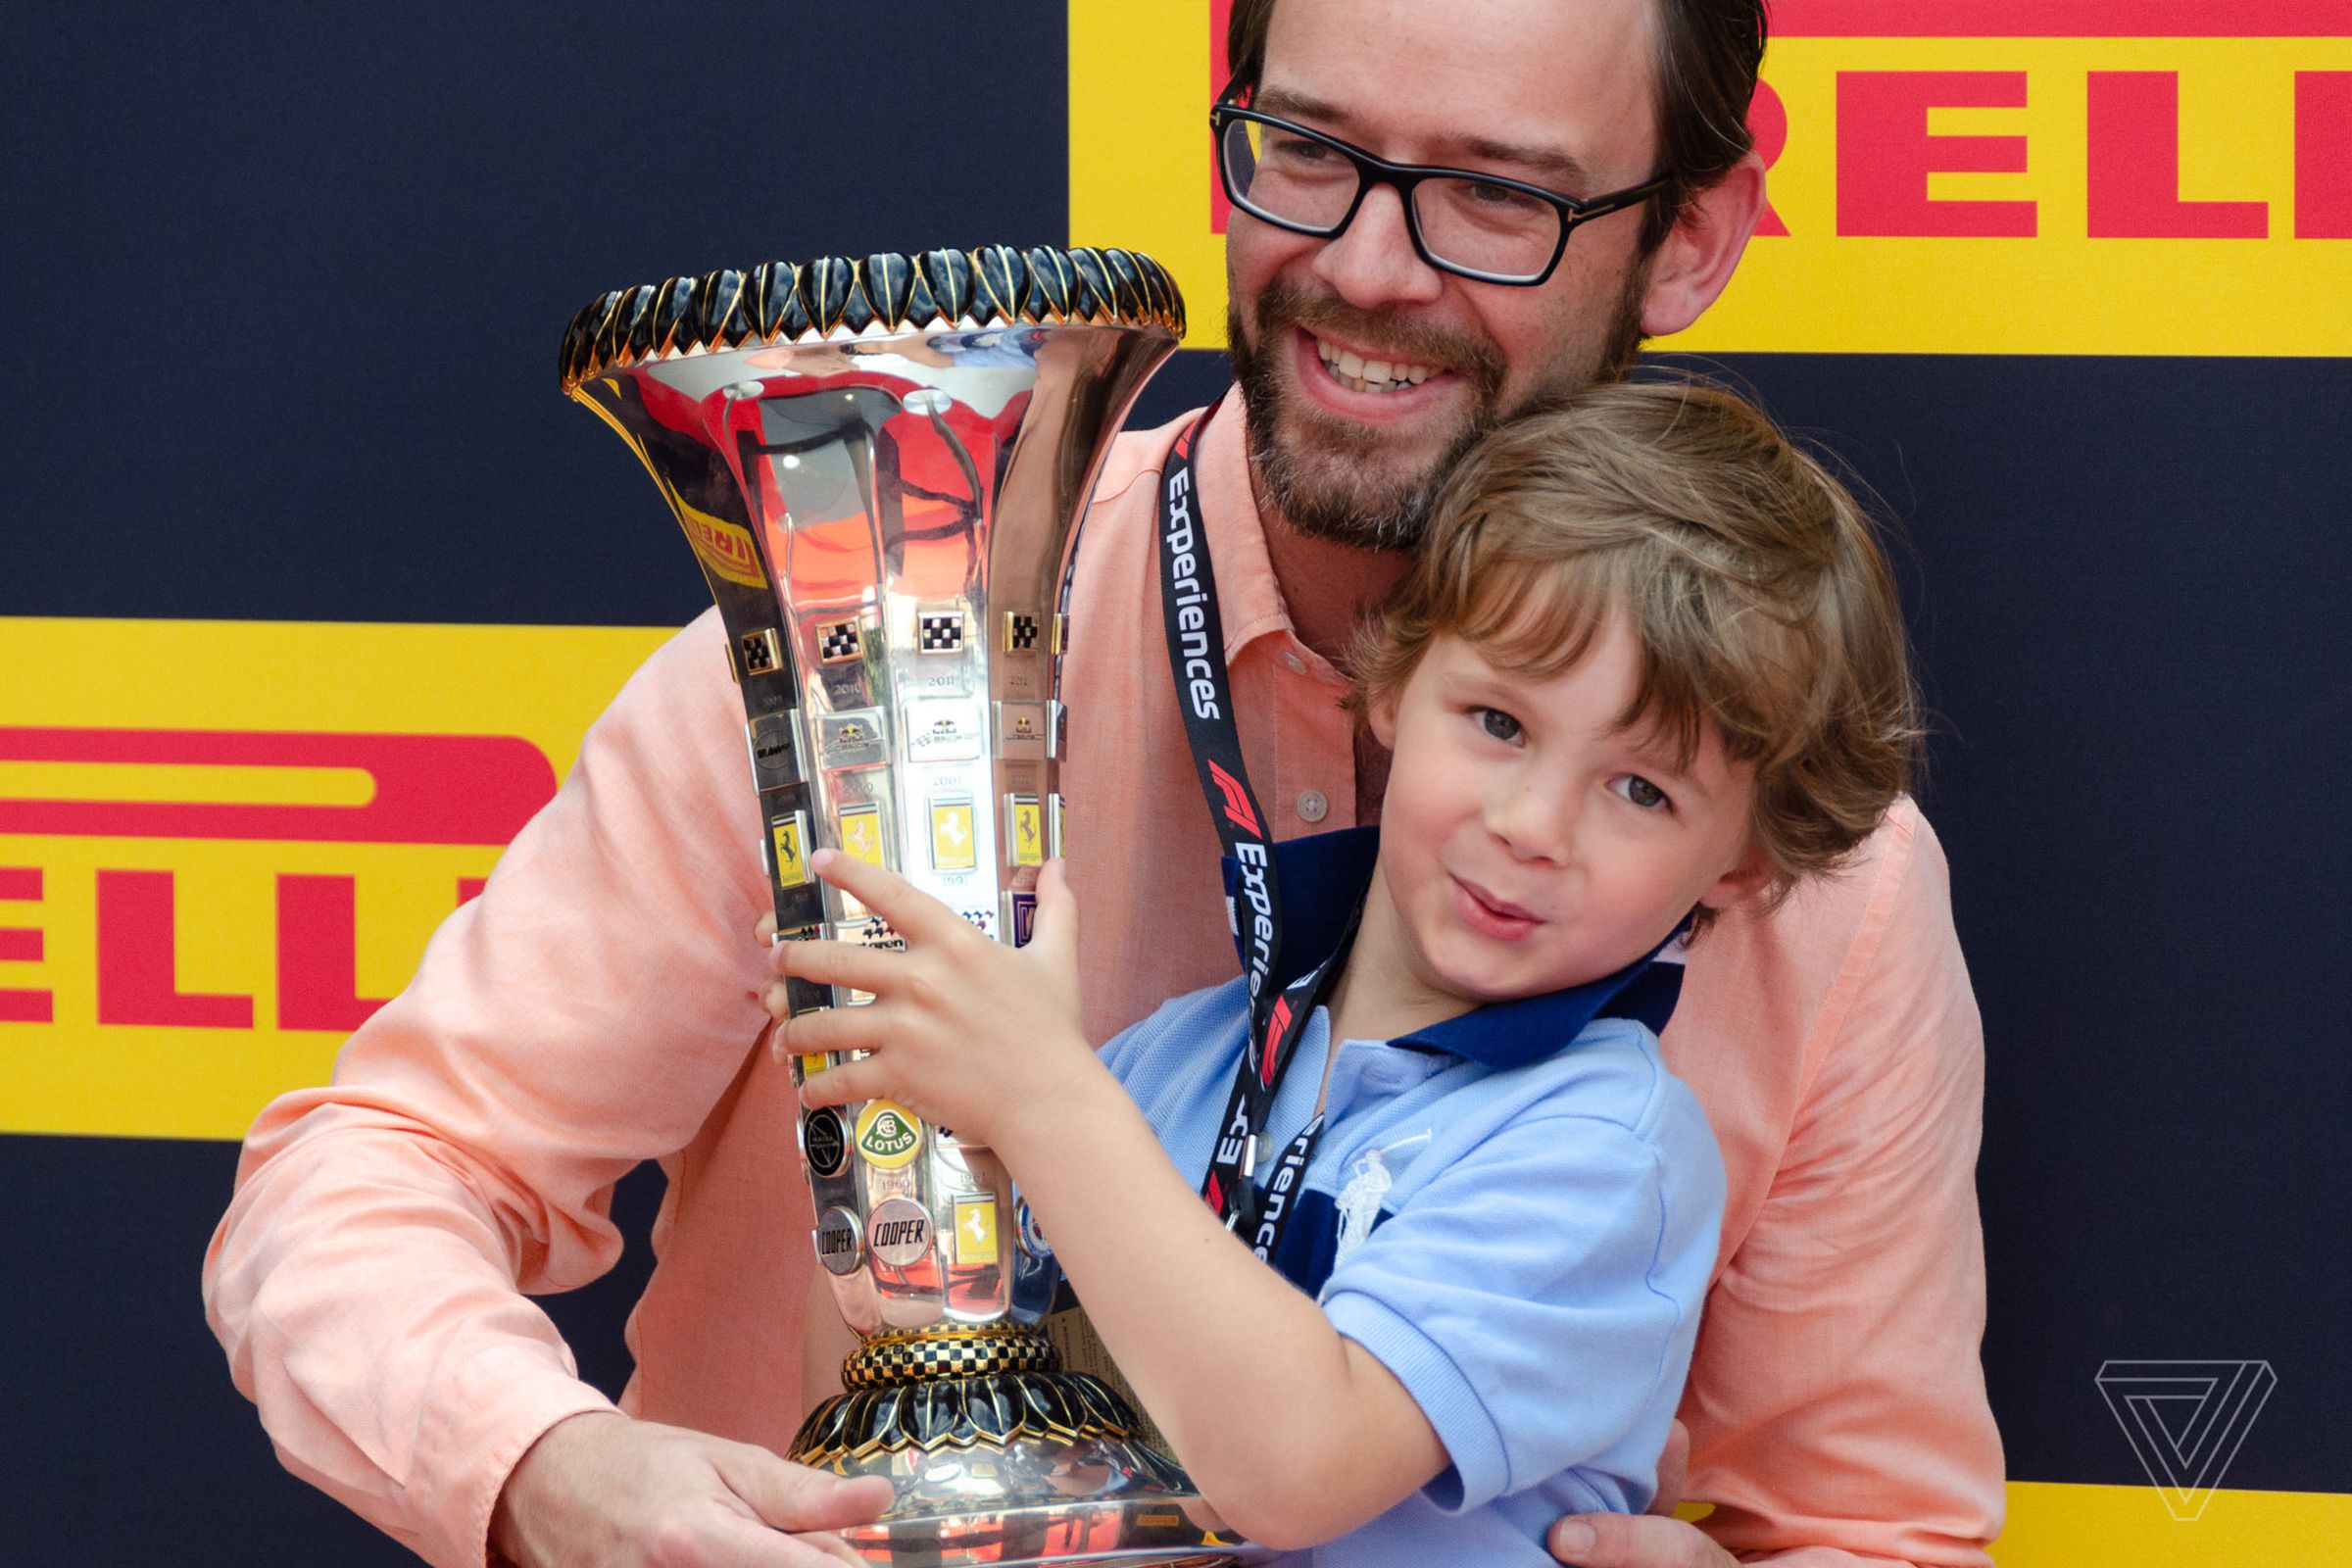 Part of the VIP fan treatment at the French Grand Prix is having your picture taken with a replica trophy.